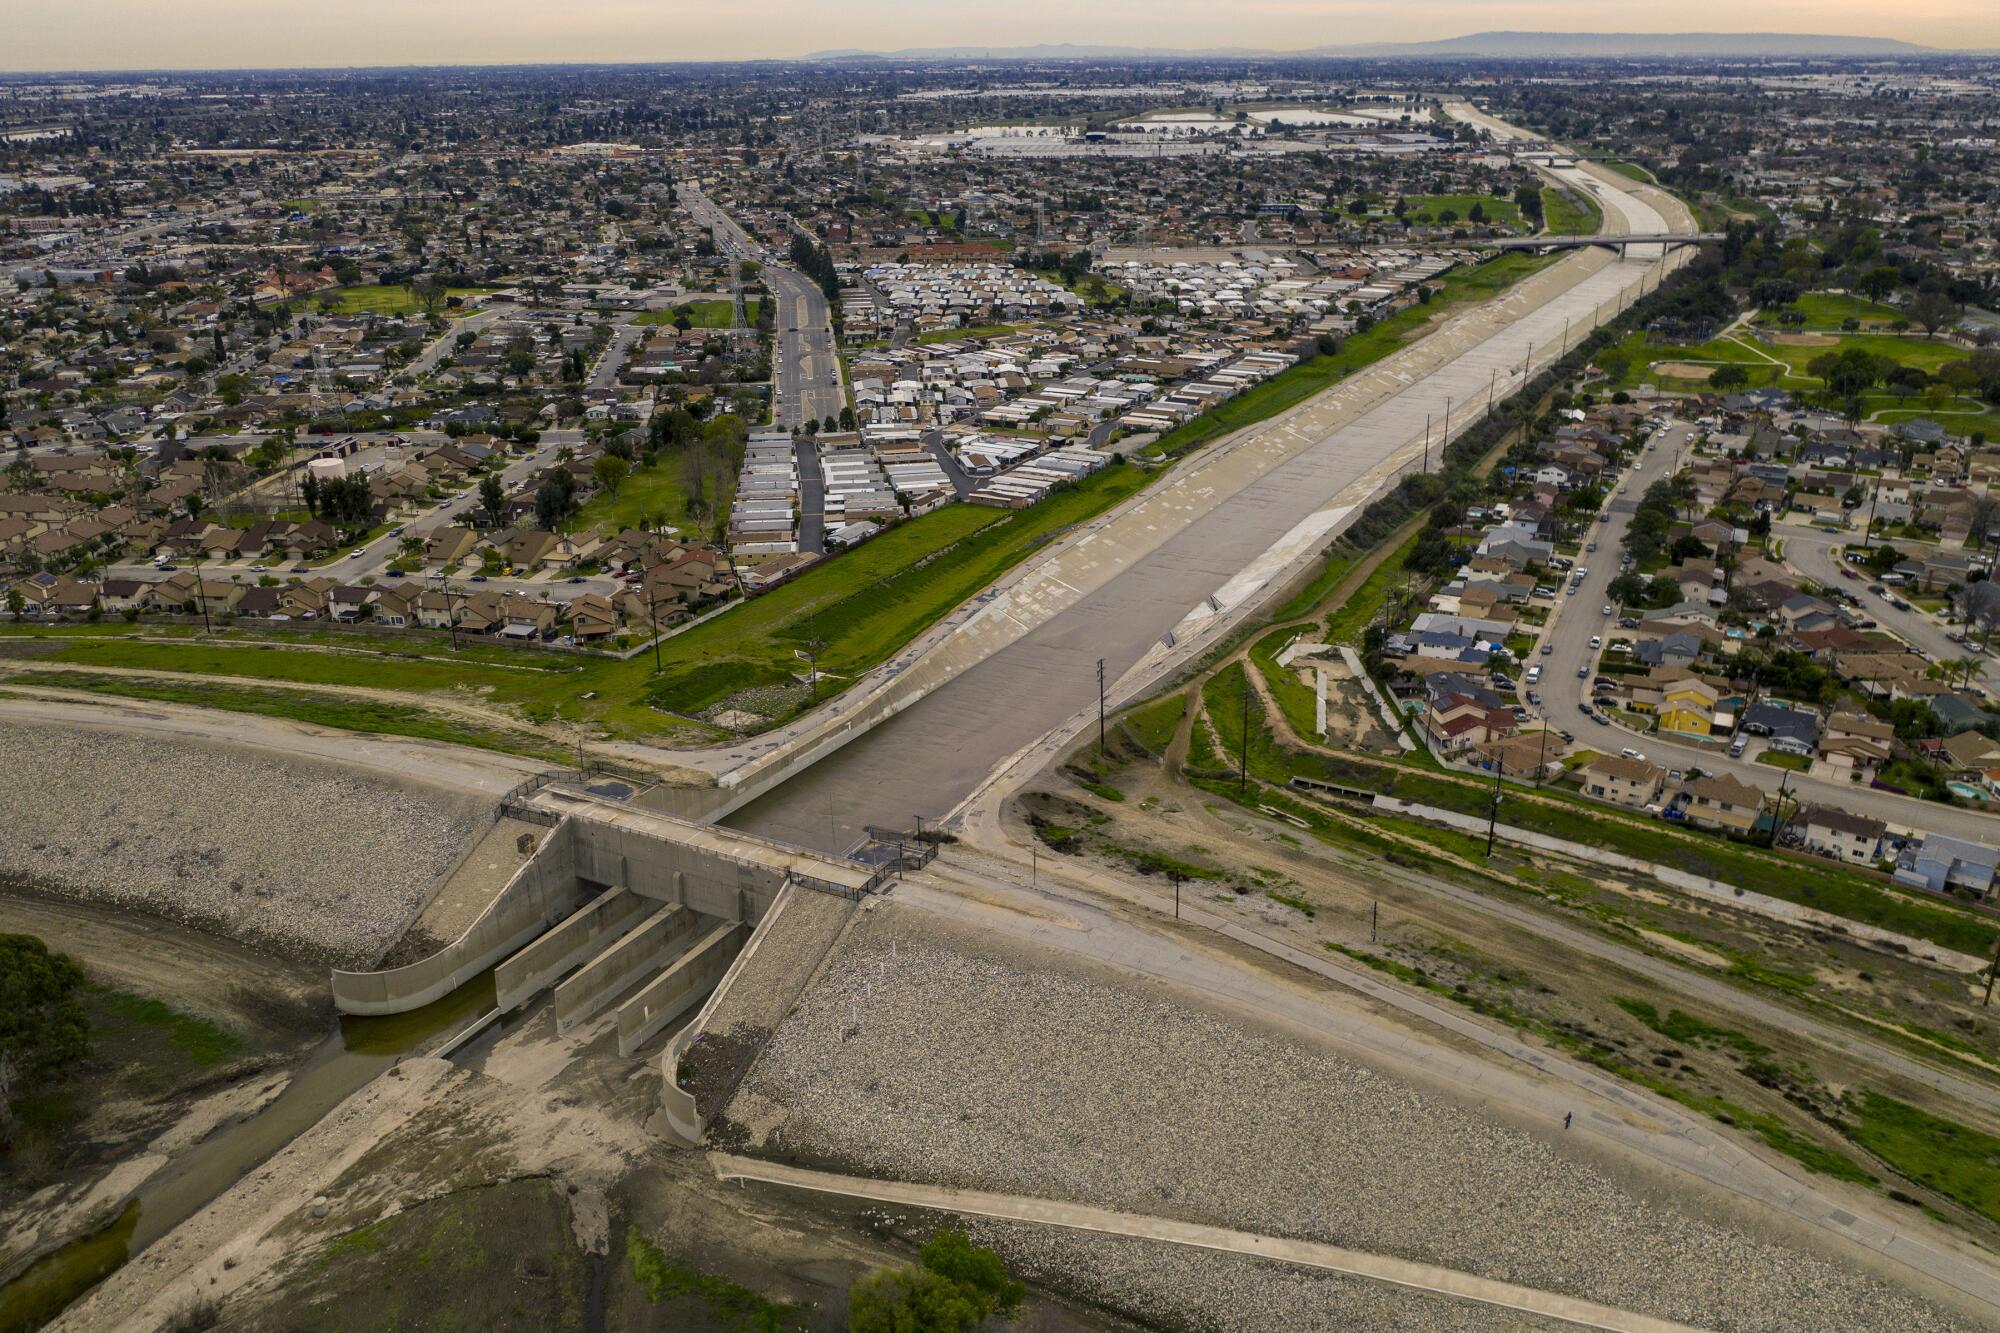 An aerial view of the Whittier Narrows Dam in the area between Montebello and Pico Rivera in Montebello